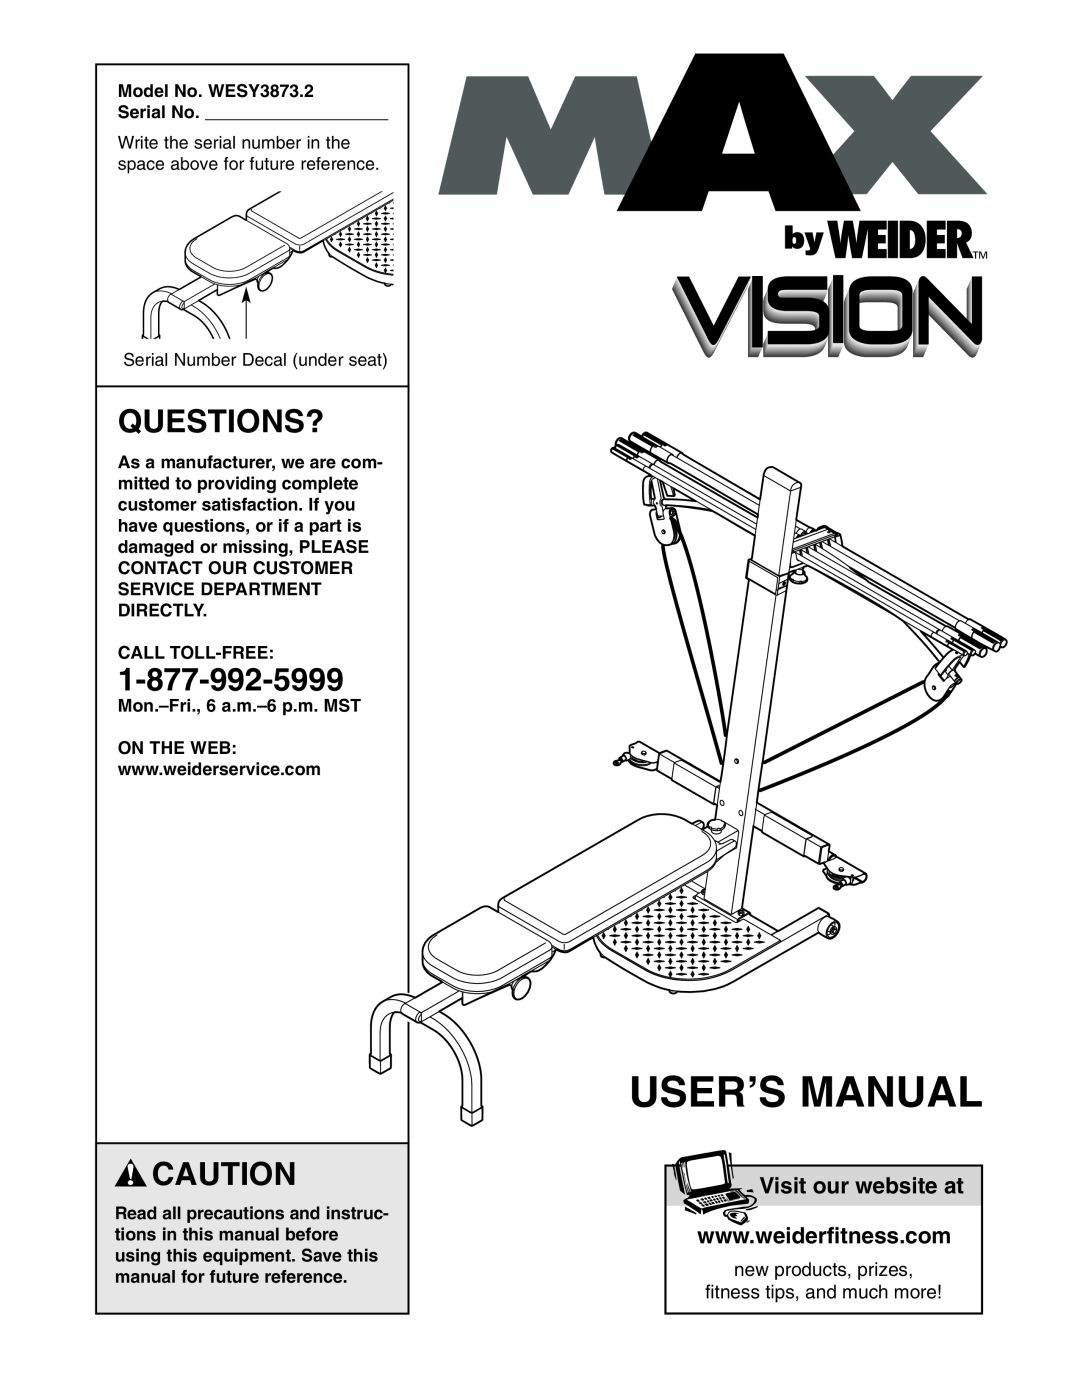 Weider WESY3873.2 user manual Questions?, User’S Manual, Visit our website at 